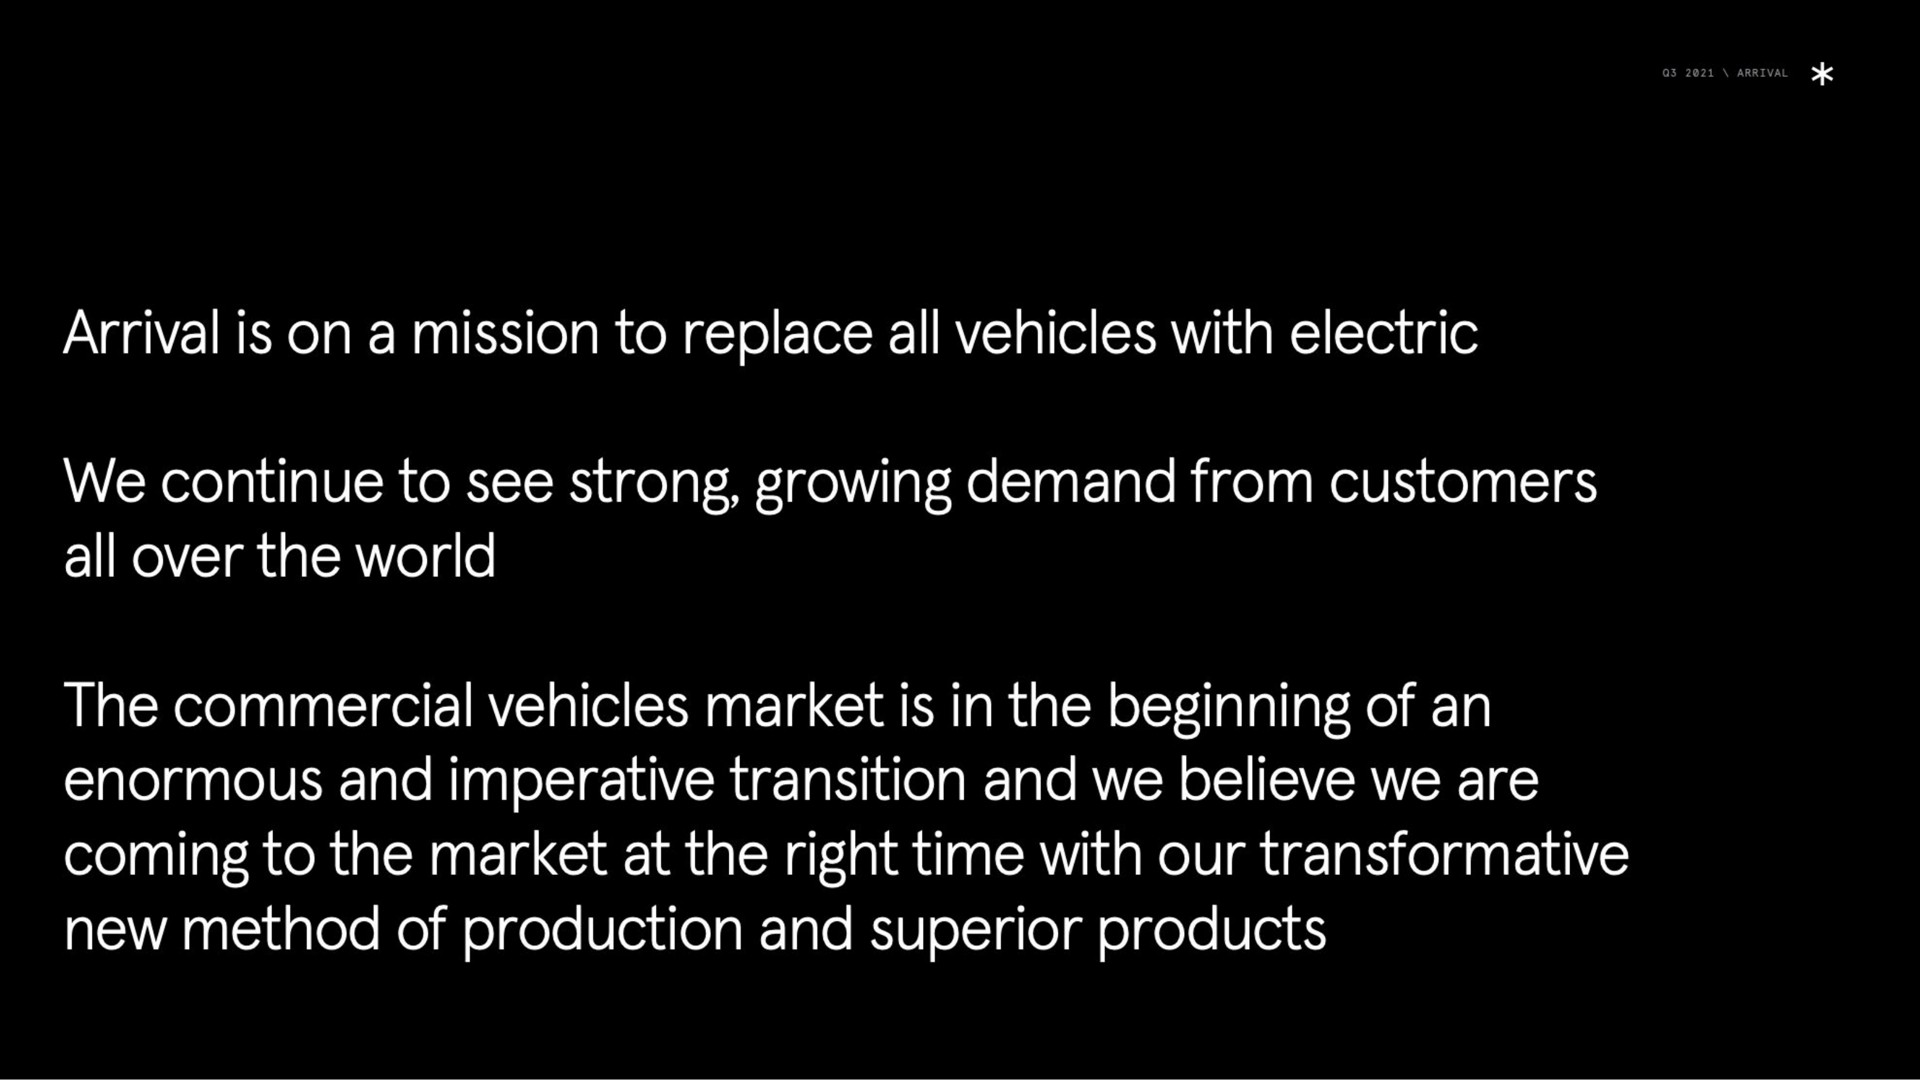 arrival is on a mission to replace all vehicles with electric we continue to see strong growing demand from customers all over the world the commercial vehicles market is in the beginning of an enormous and imperative transition and we believe we are coming to the market at the right time with our transformative new method of production and superior products | Arrival